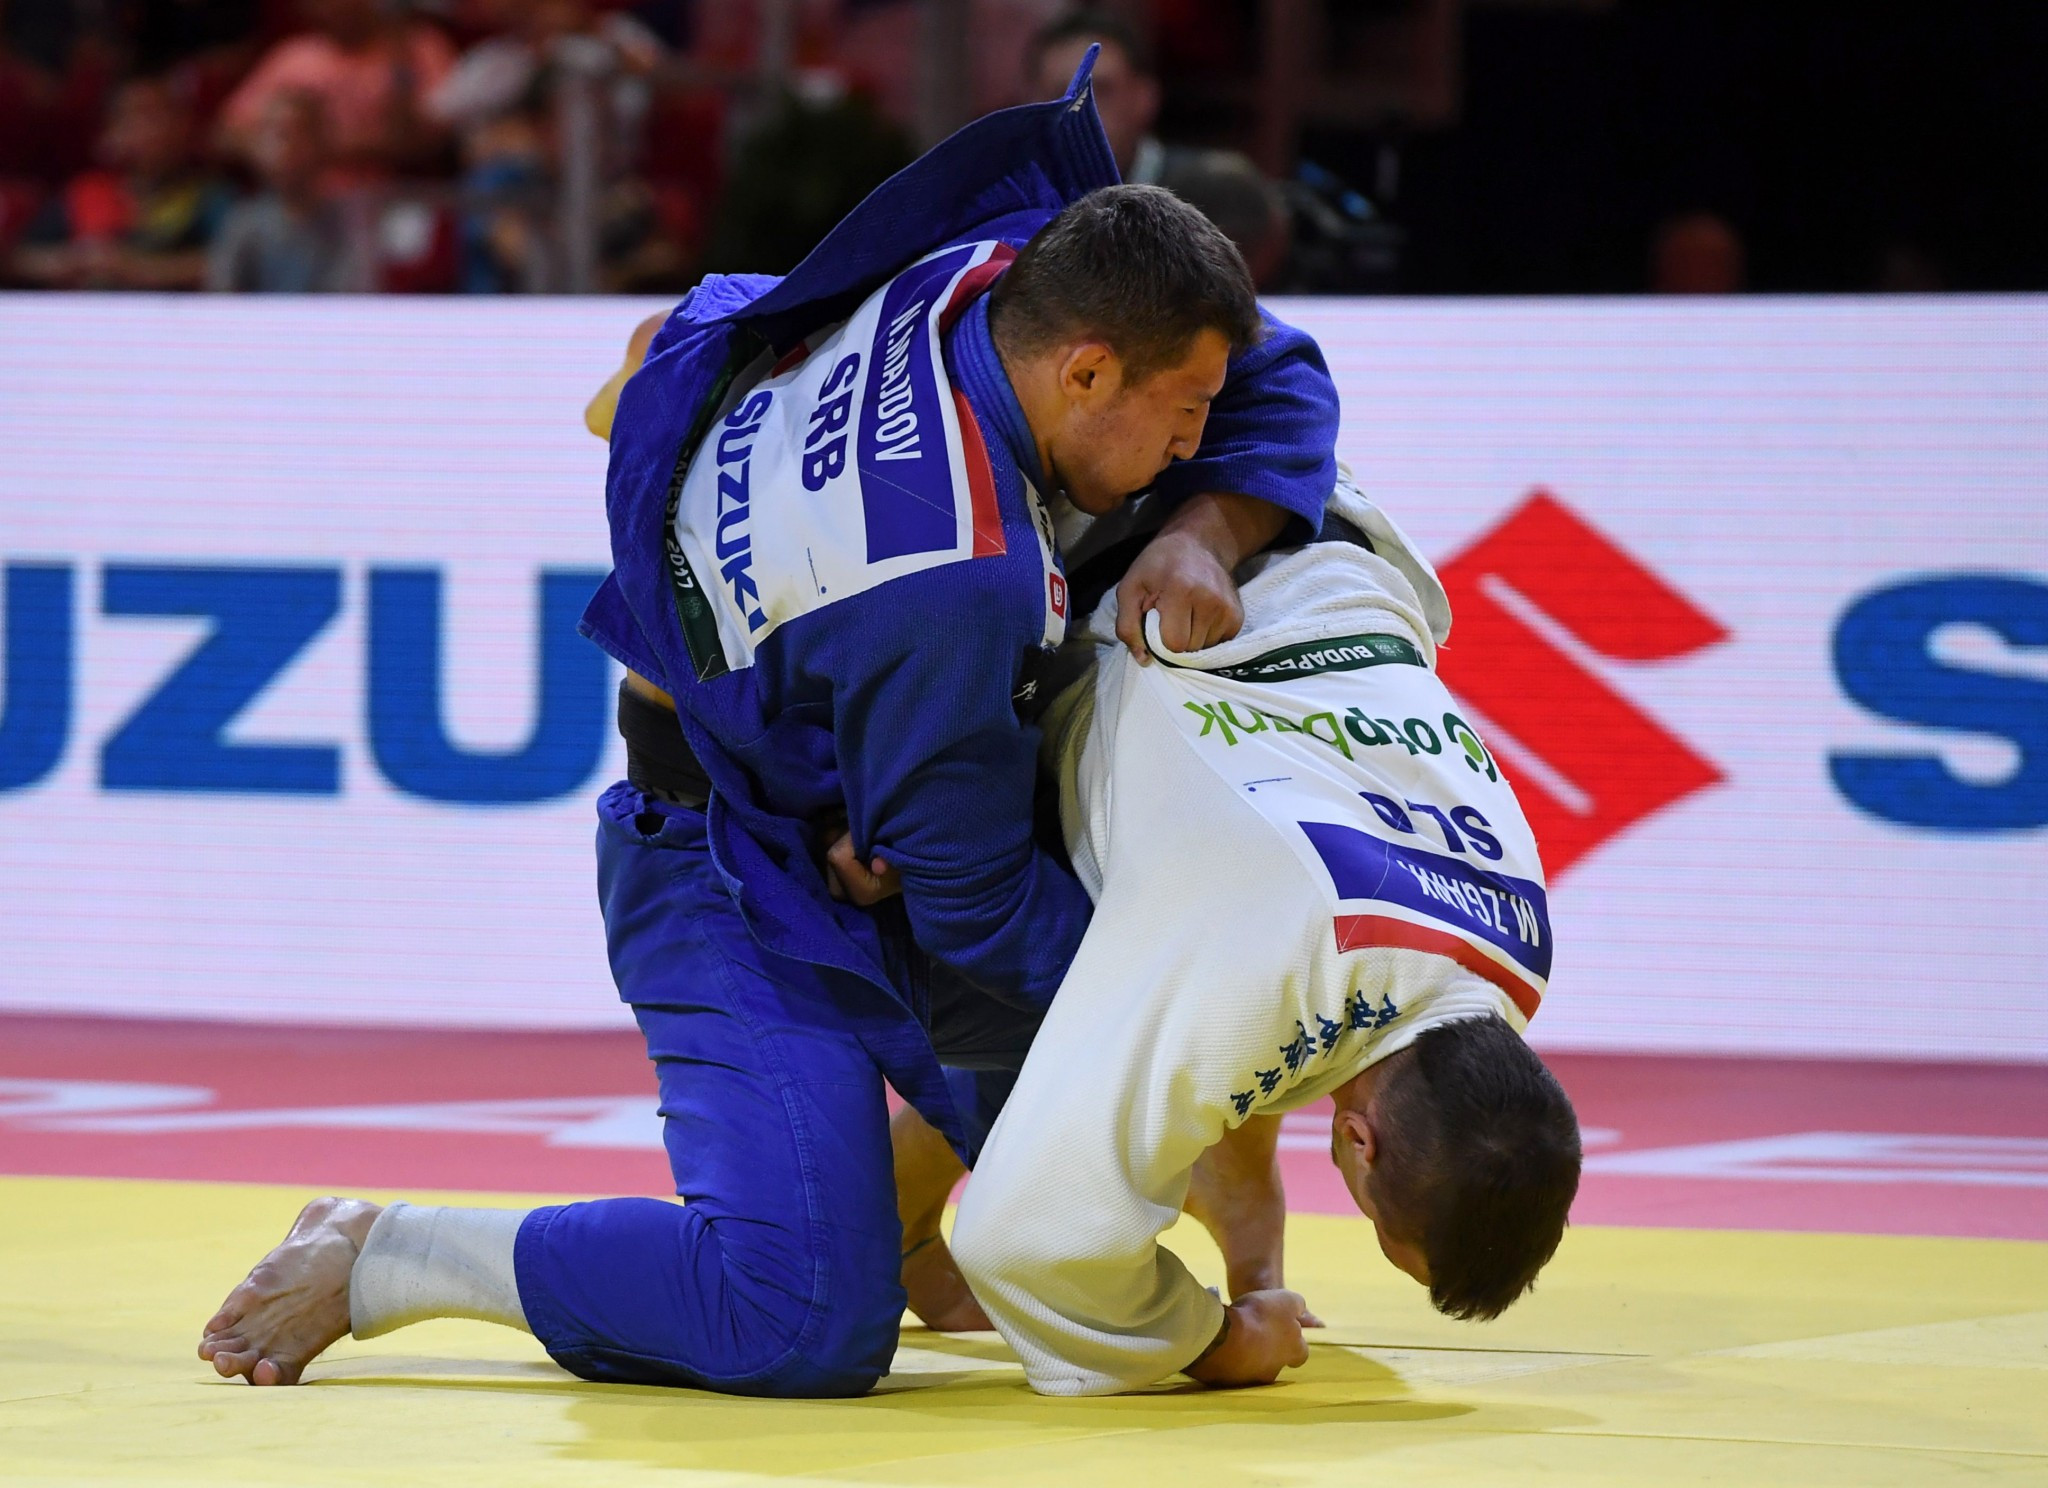 Serbia's Nemanja Majdov secured the other title on offer today as he overcame Mihael Žgank of Slovenia in the men's under-90kg final ©Getty Images